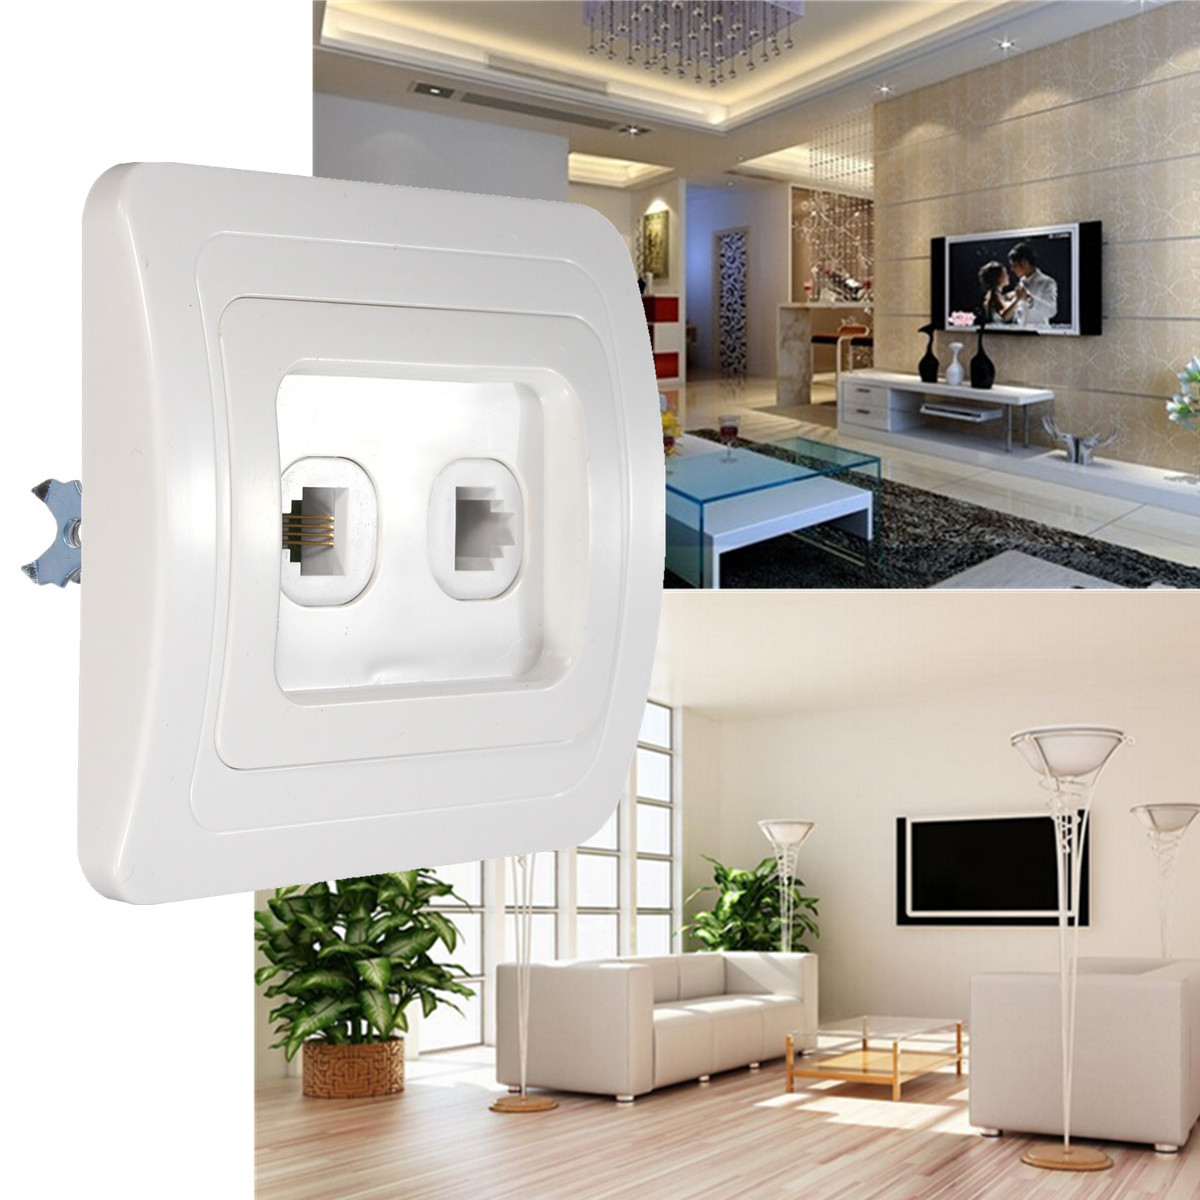 RJ11-Electric-Wall-Station-Socket-Telephone-Phone-Dual-Outlet-Panel-Face-Plate-Socket-Connector-1399685-1